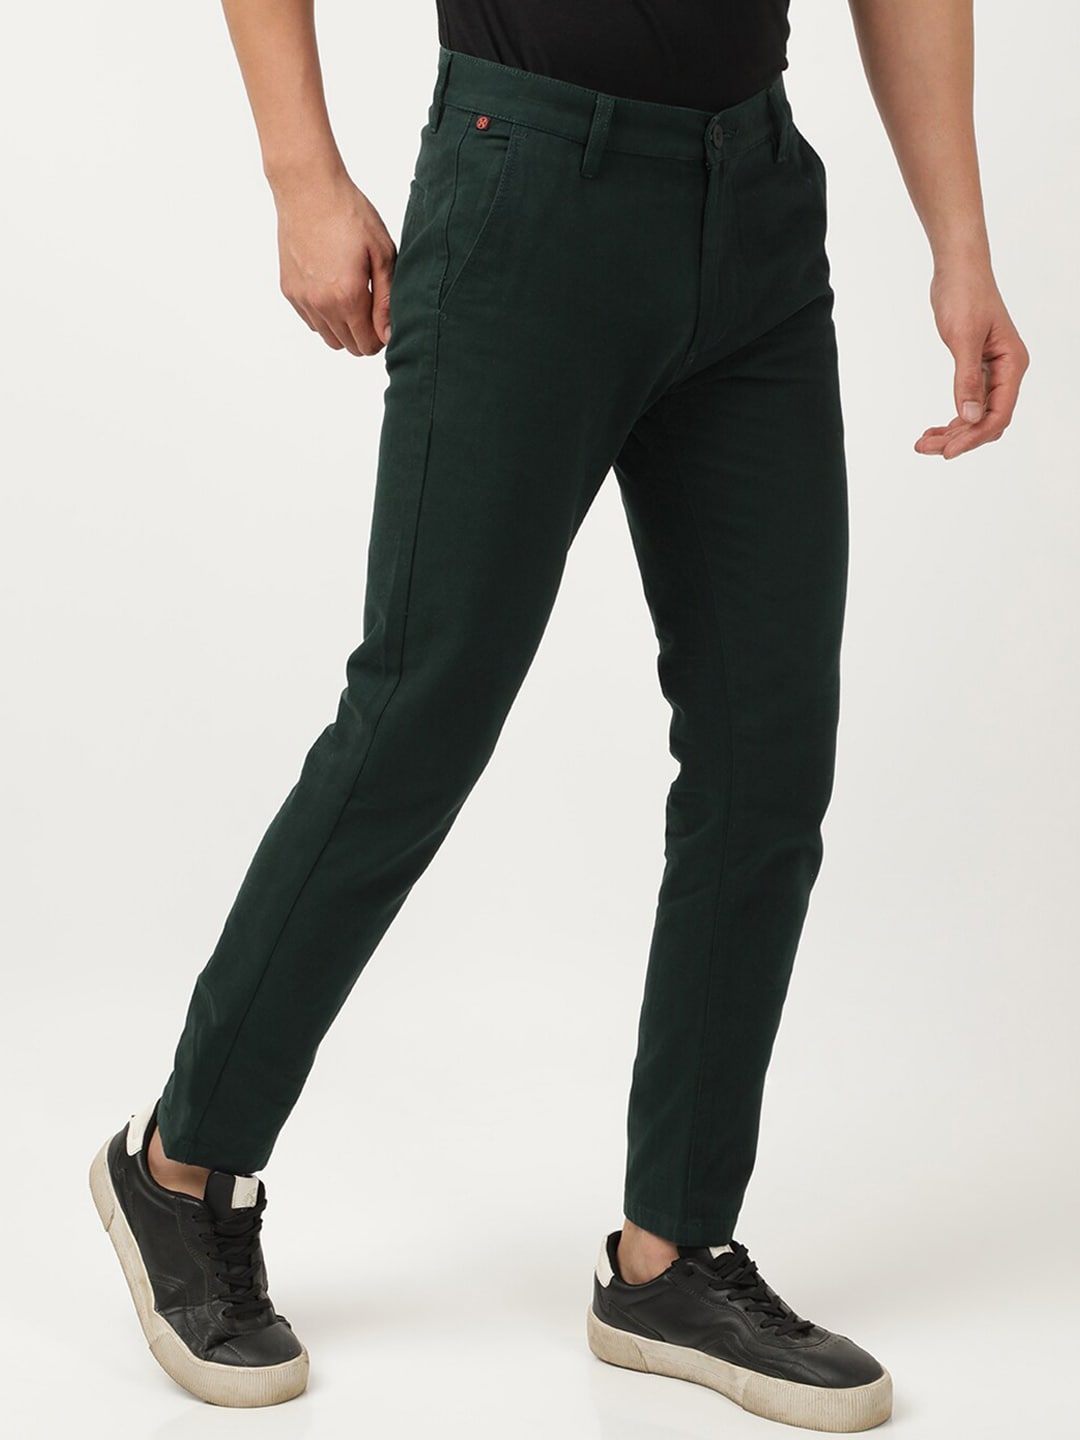 Shop Men Solid Mid-Rise Chinos Online.